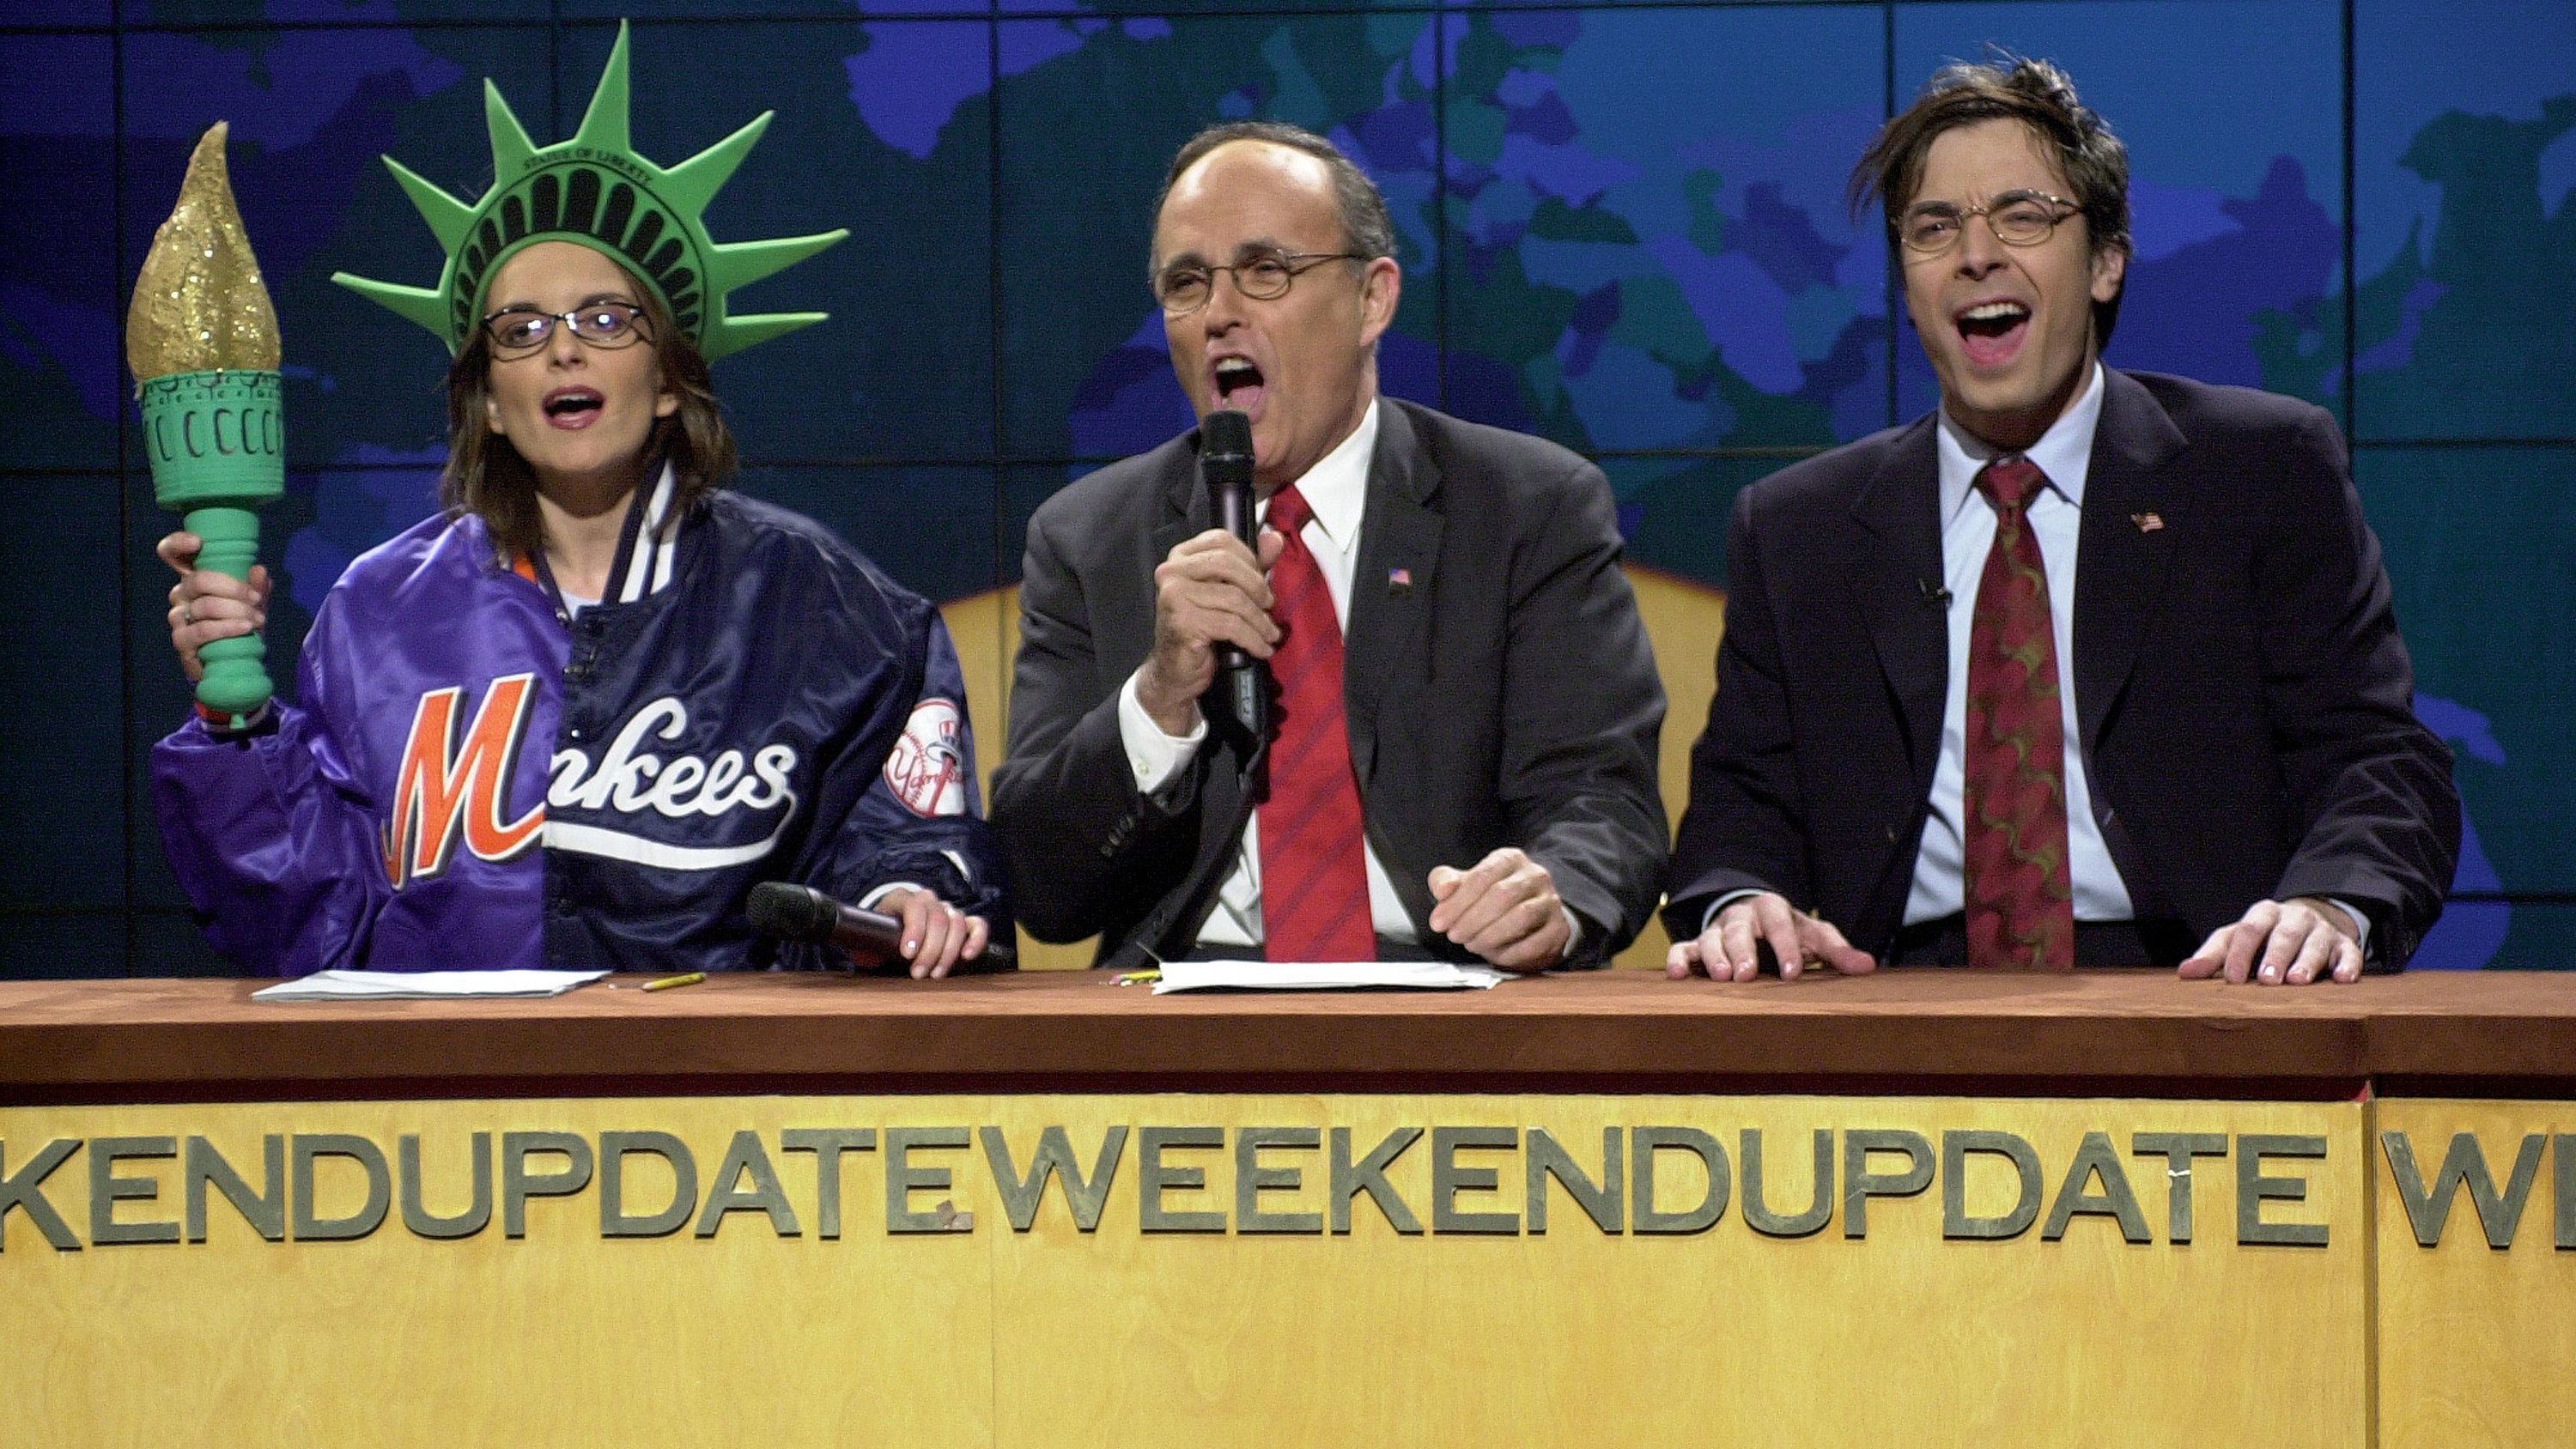 Giuliani appears on an episode of "Saturday Night Live" in December 2001.